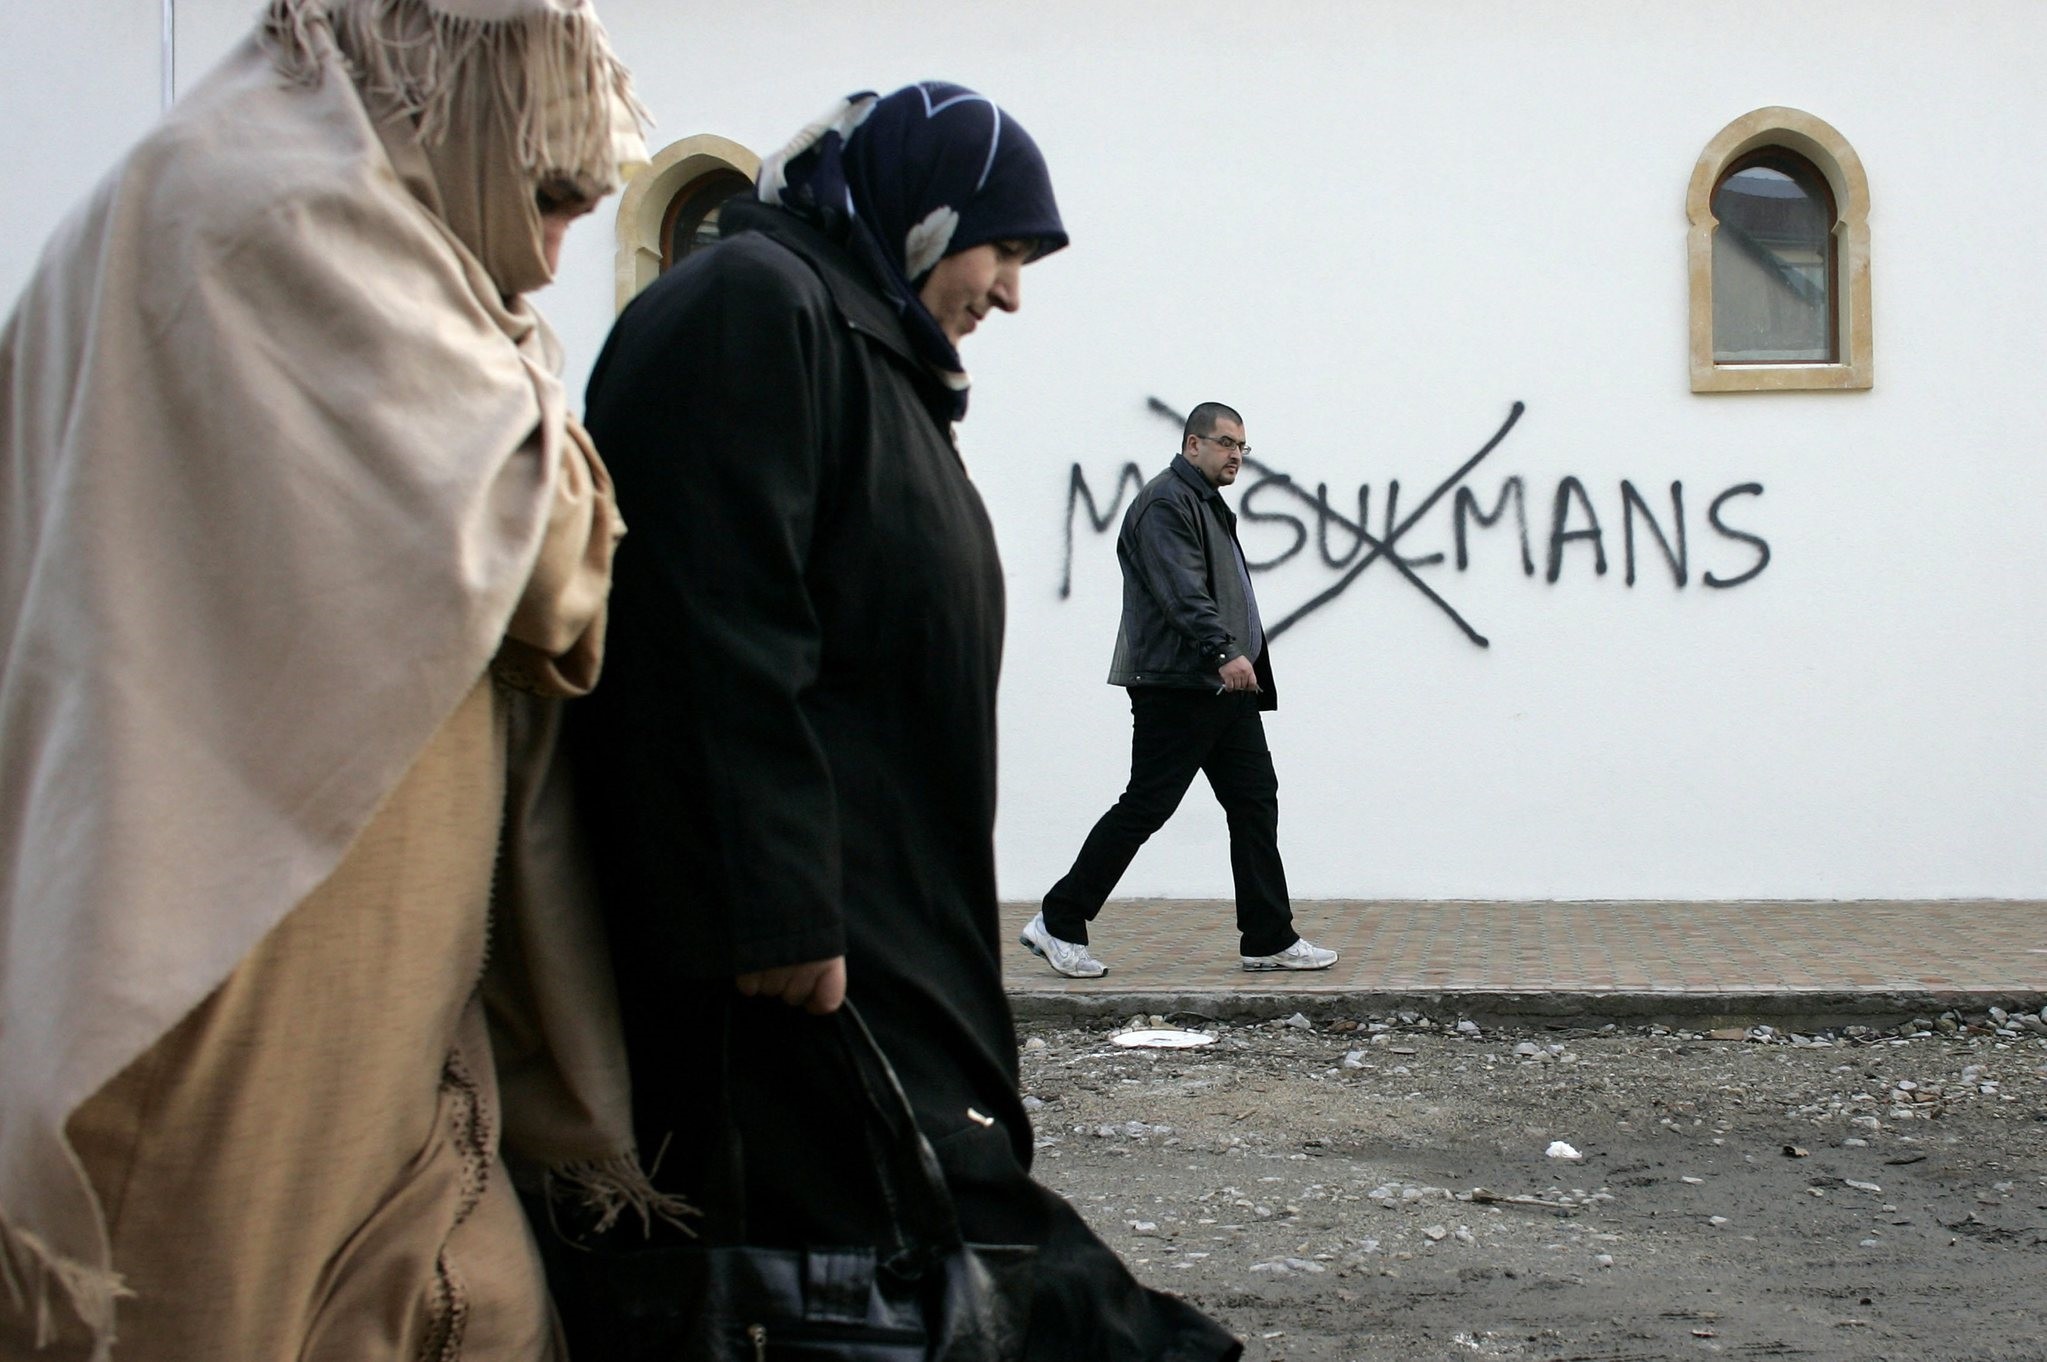 In this Monday Feb. 8, 2010 file photo, Muslim residents walk past racial slurs painted on the walls of a mosque in the town of Saint-Etienne, central France. (AP Photo)